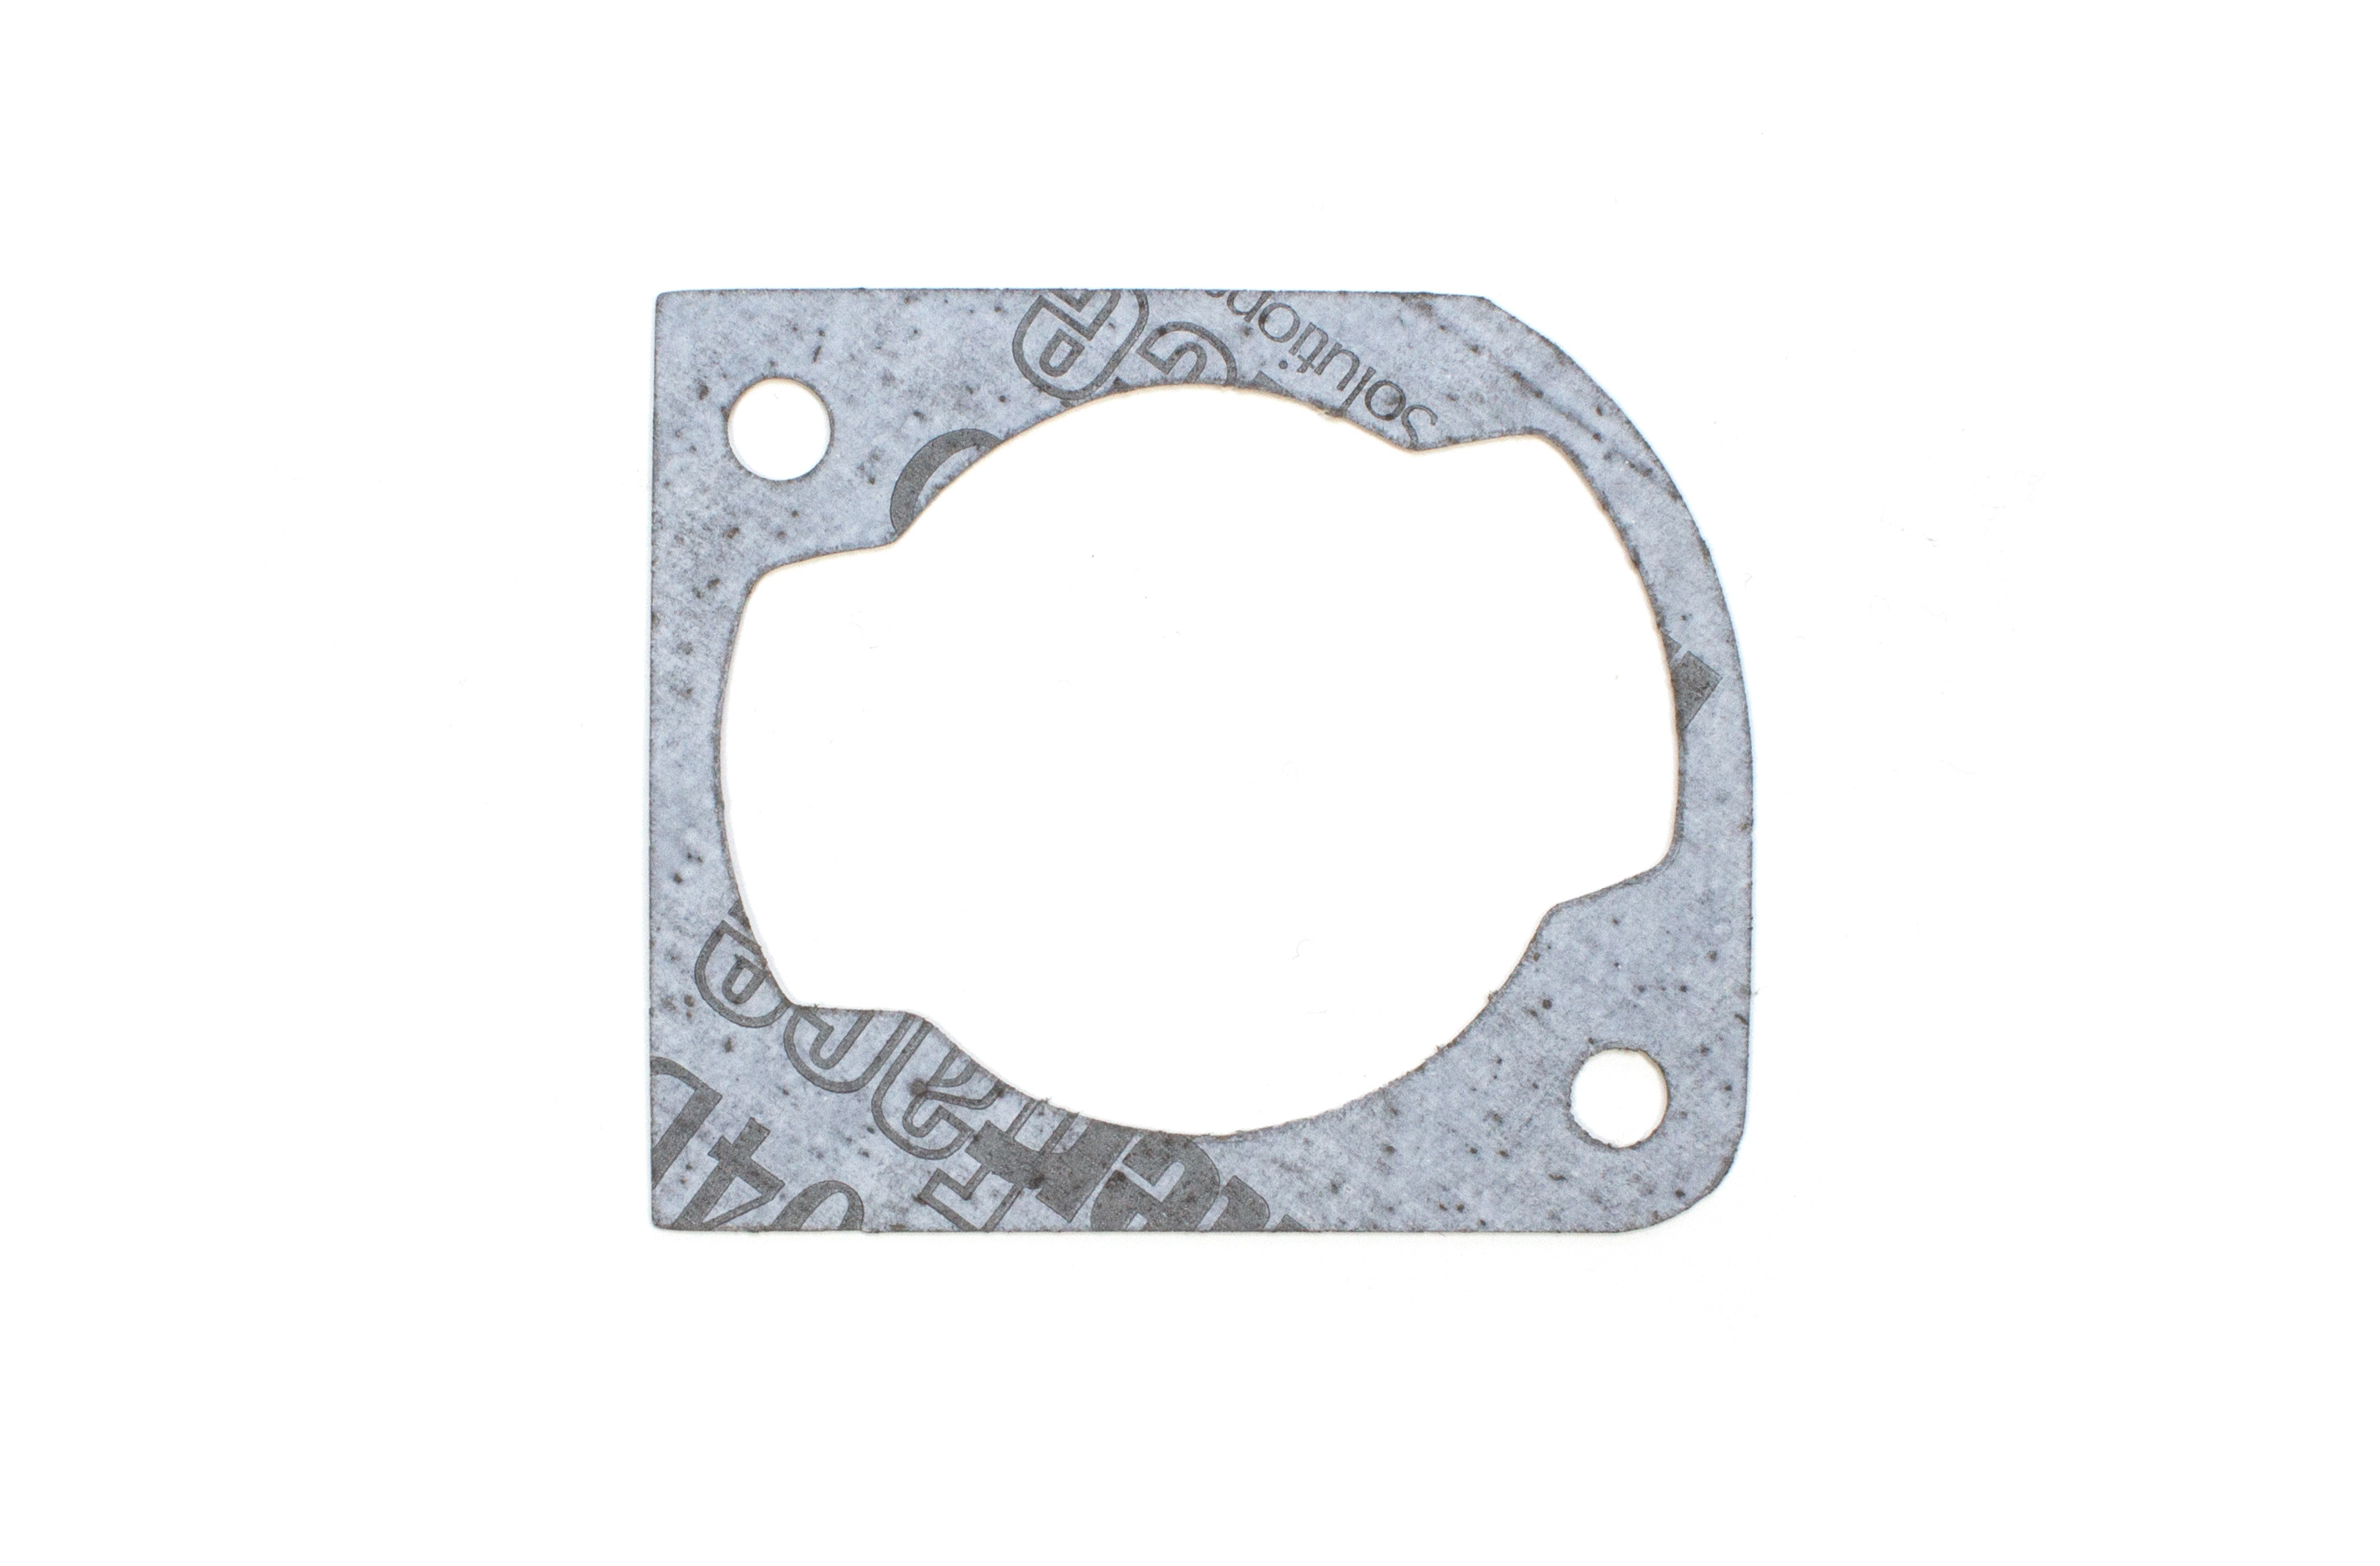 y110010 Cylinder gasket for CY / Zenoah G230/260, different versions to choose from